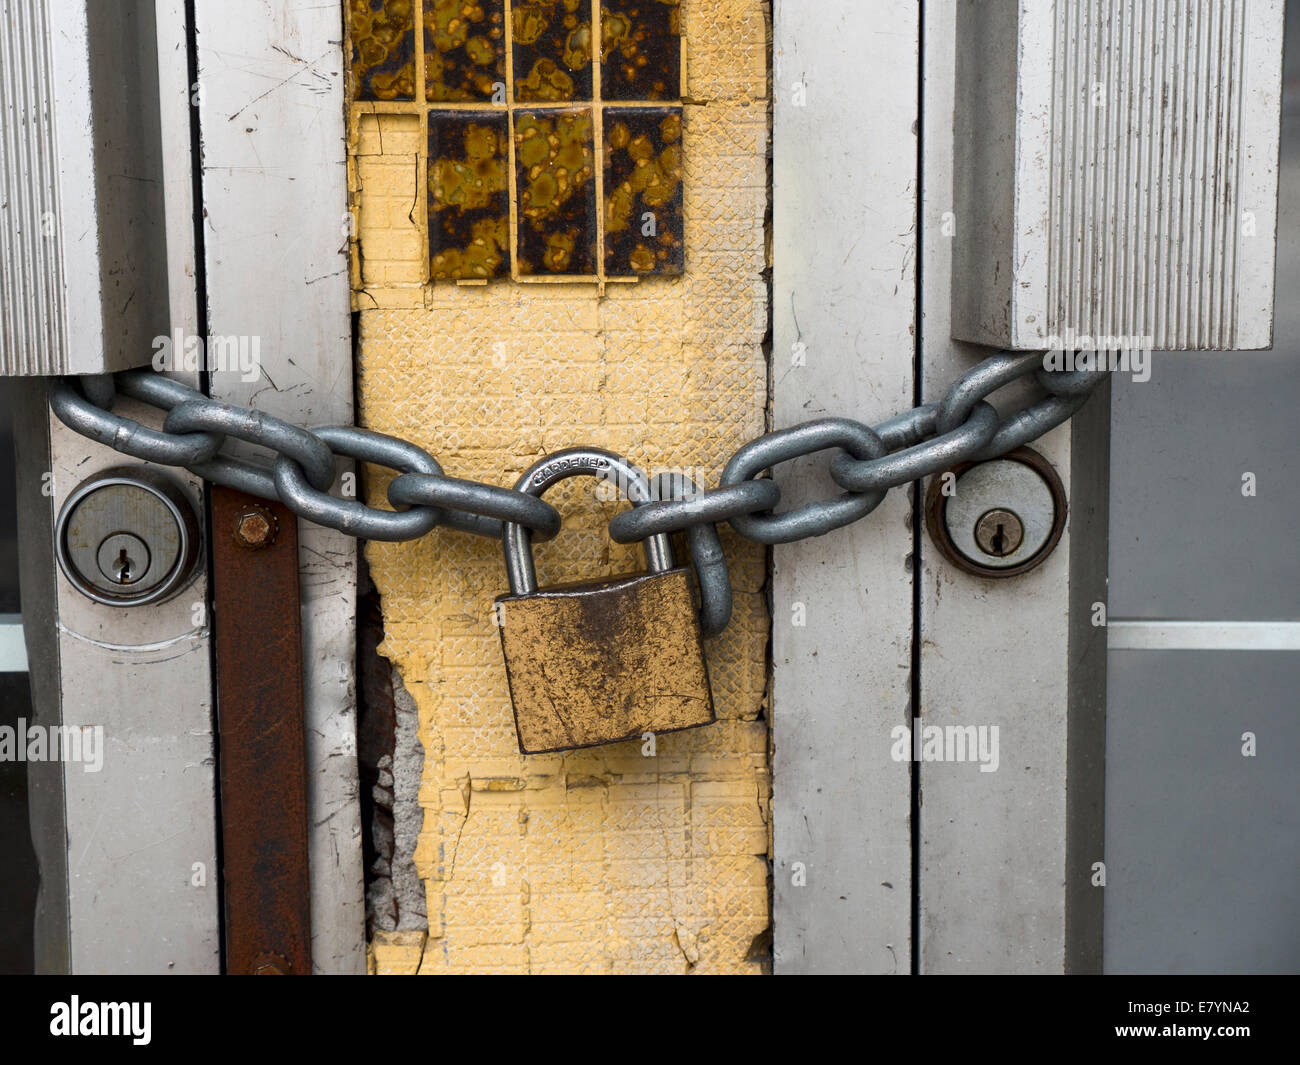 Lock and chain on a commercial buildings metal doors Stock Photo